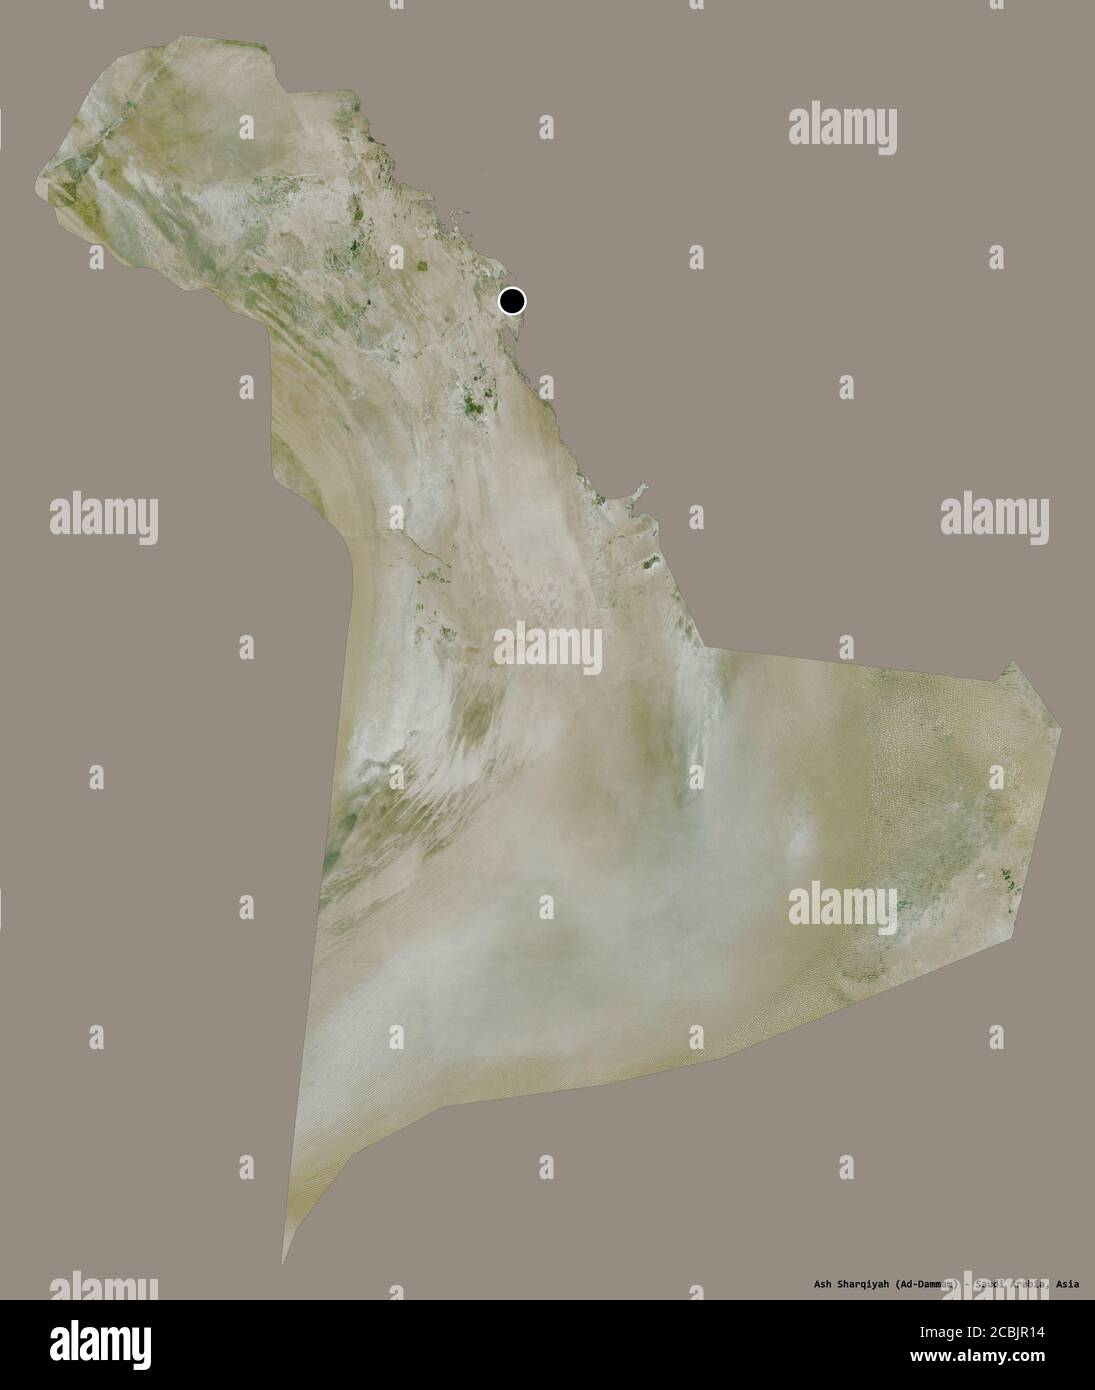 Shape of Ash Sharqiyah, region of Saudi Arabia, with its capital isolated on a solid color background. Satellite imagery. 3D rendering Stock Photo